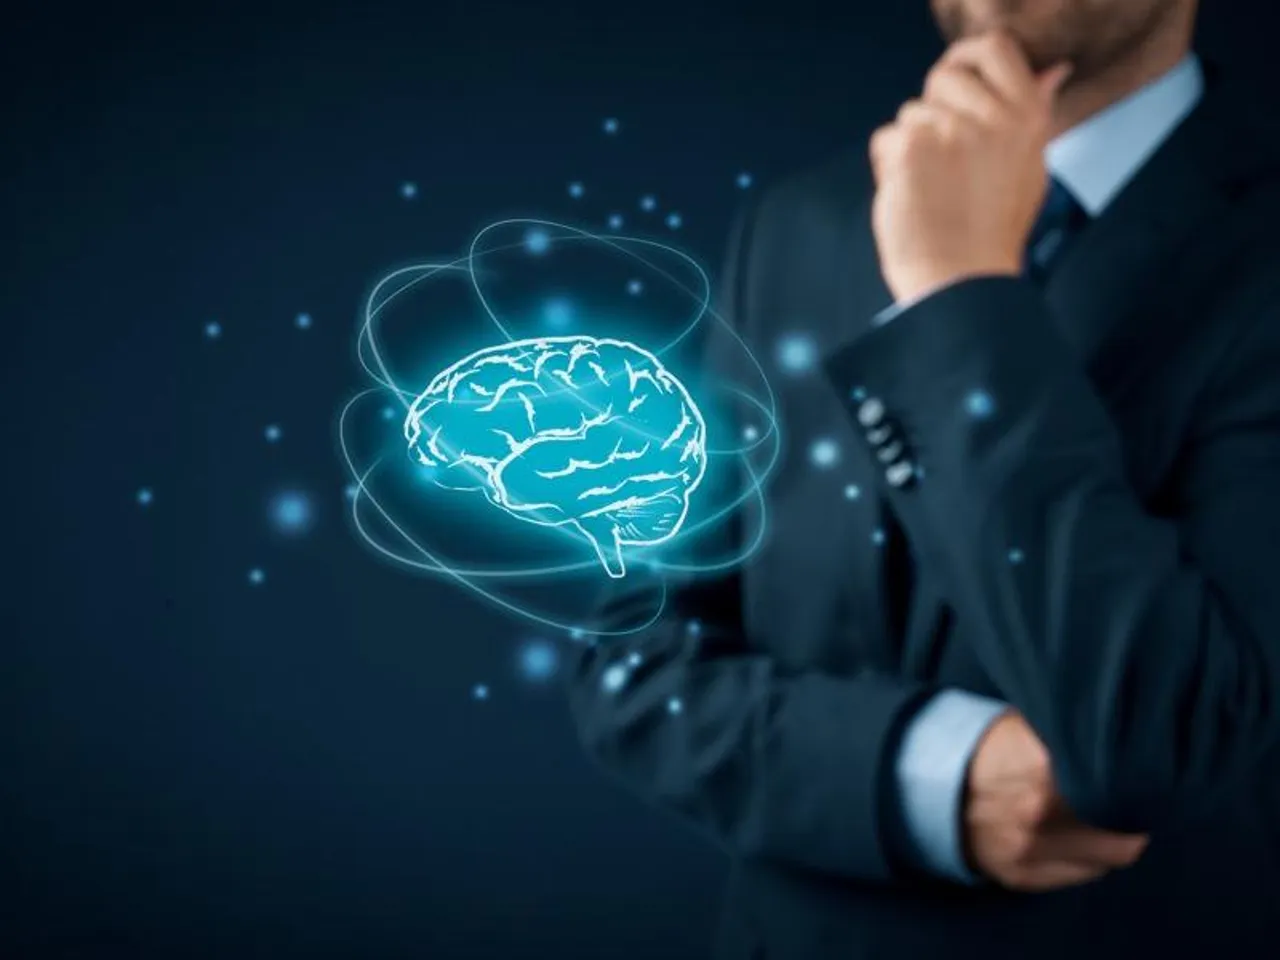 Salesforce open sources research to advance state of the art in AI for common sense reasoning